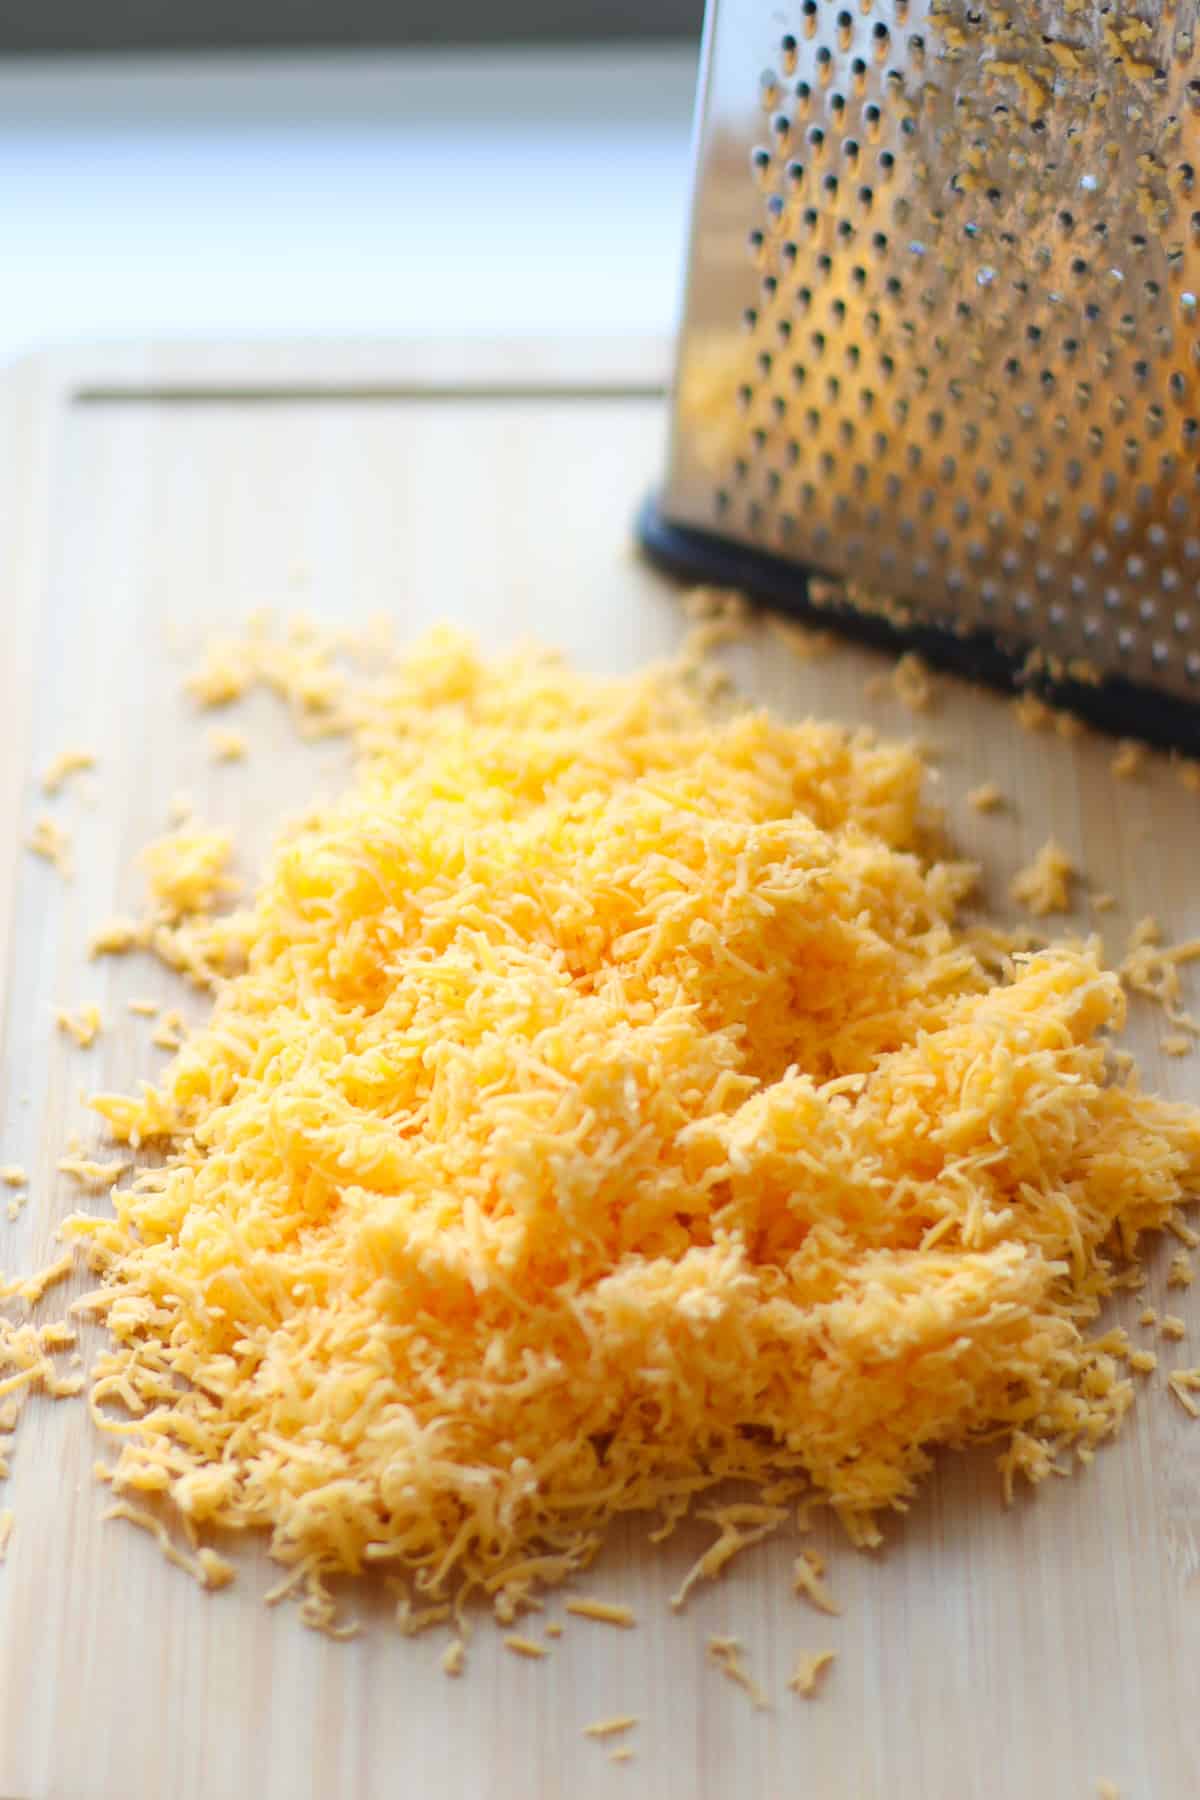 A pile of finely shredded cheese in front of a cheese grater.